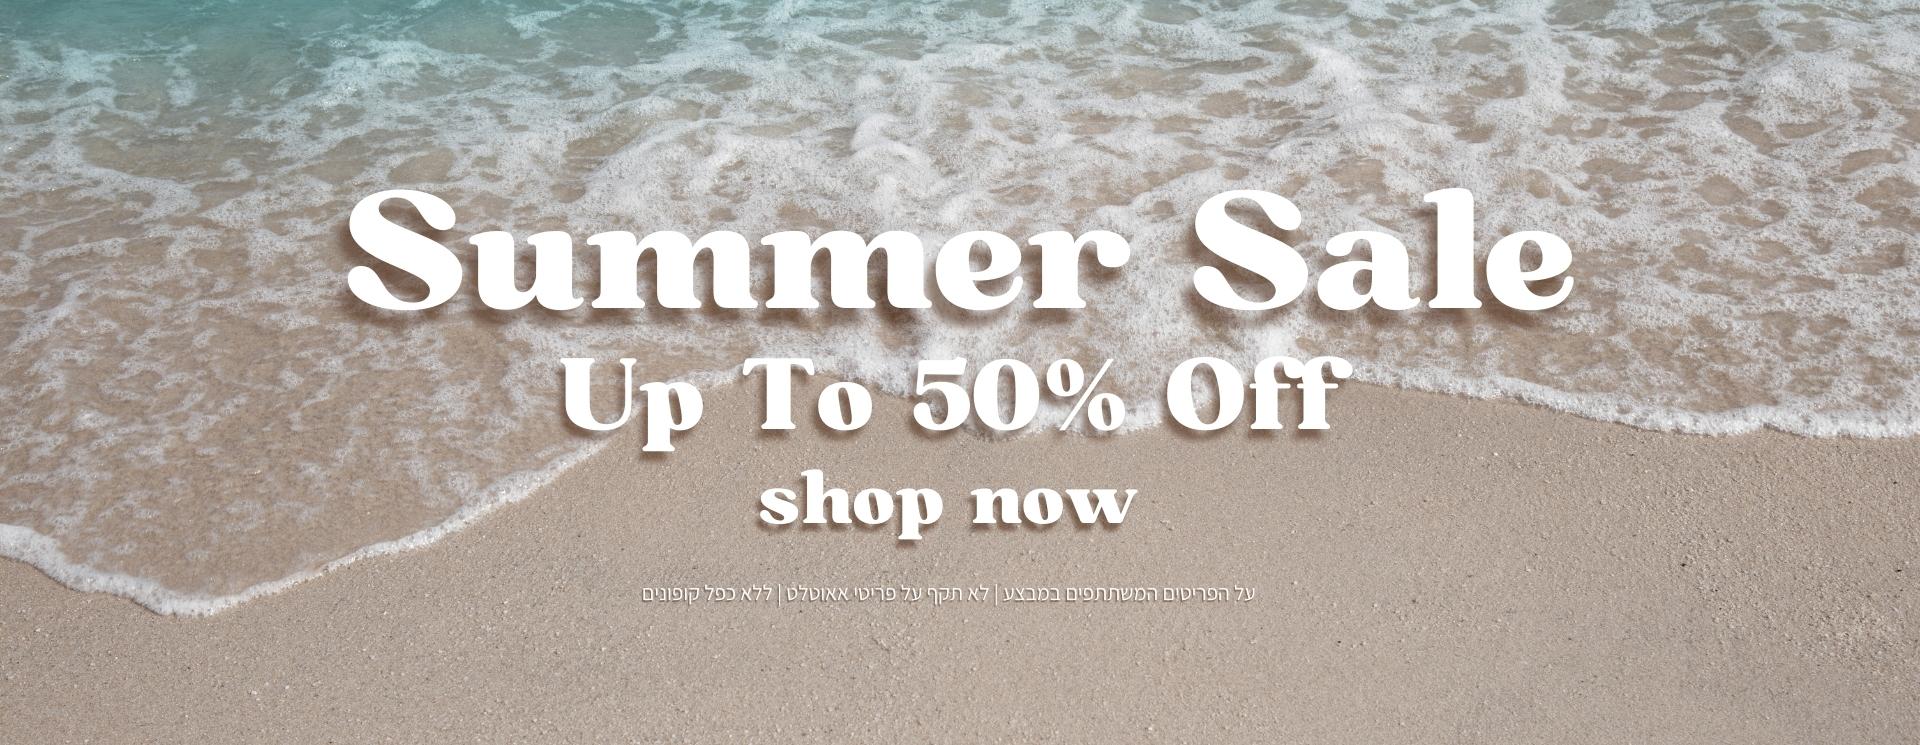 SUMMER SALE- UP TO 50 OFF. SHOP NOW